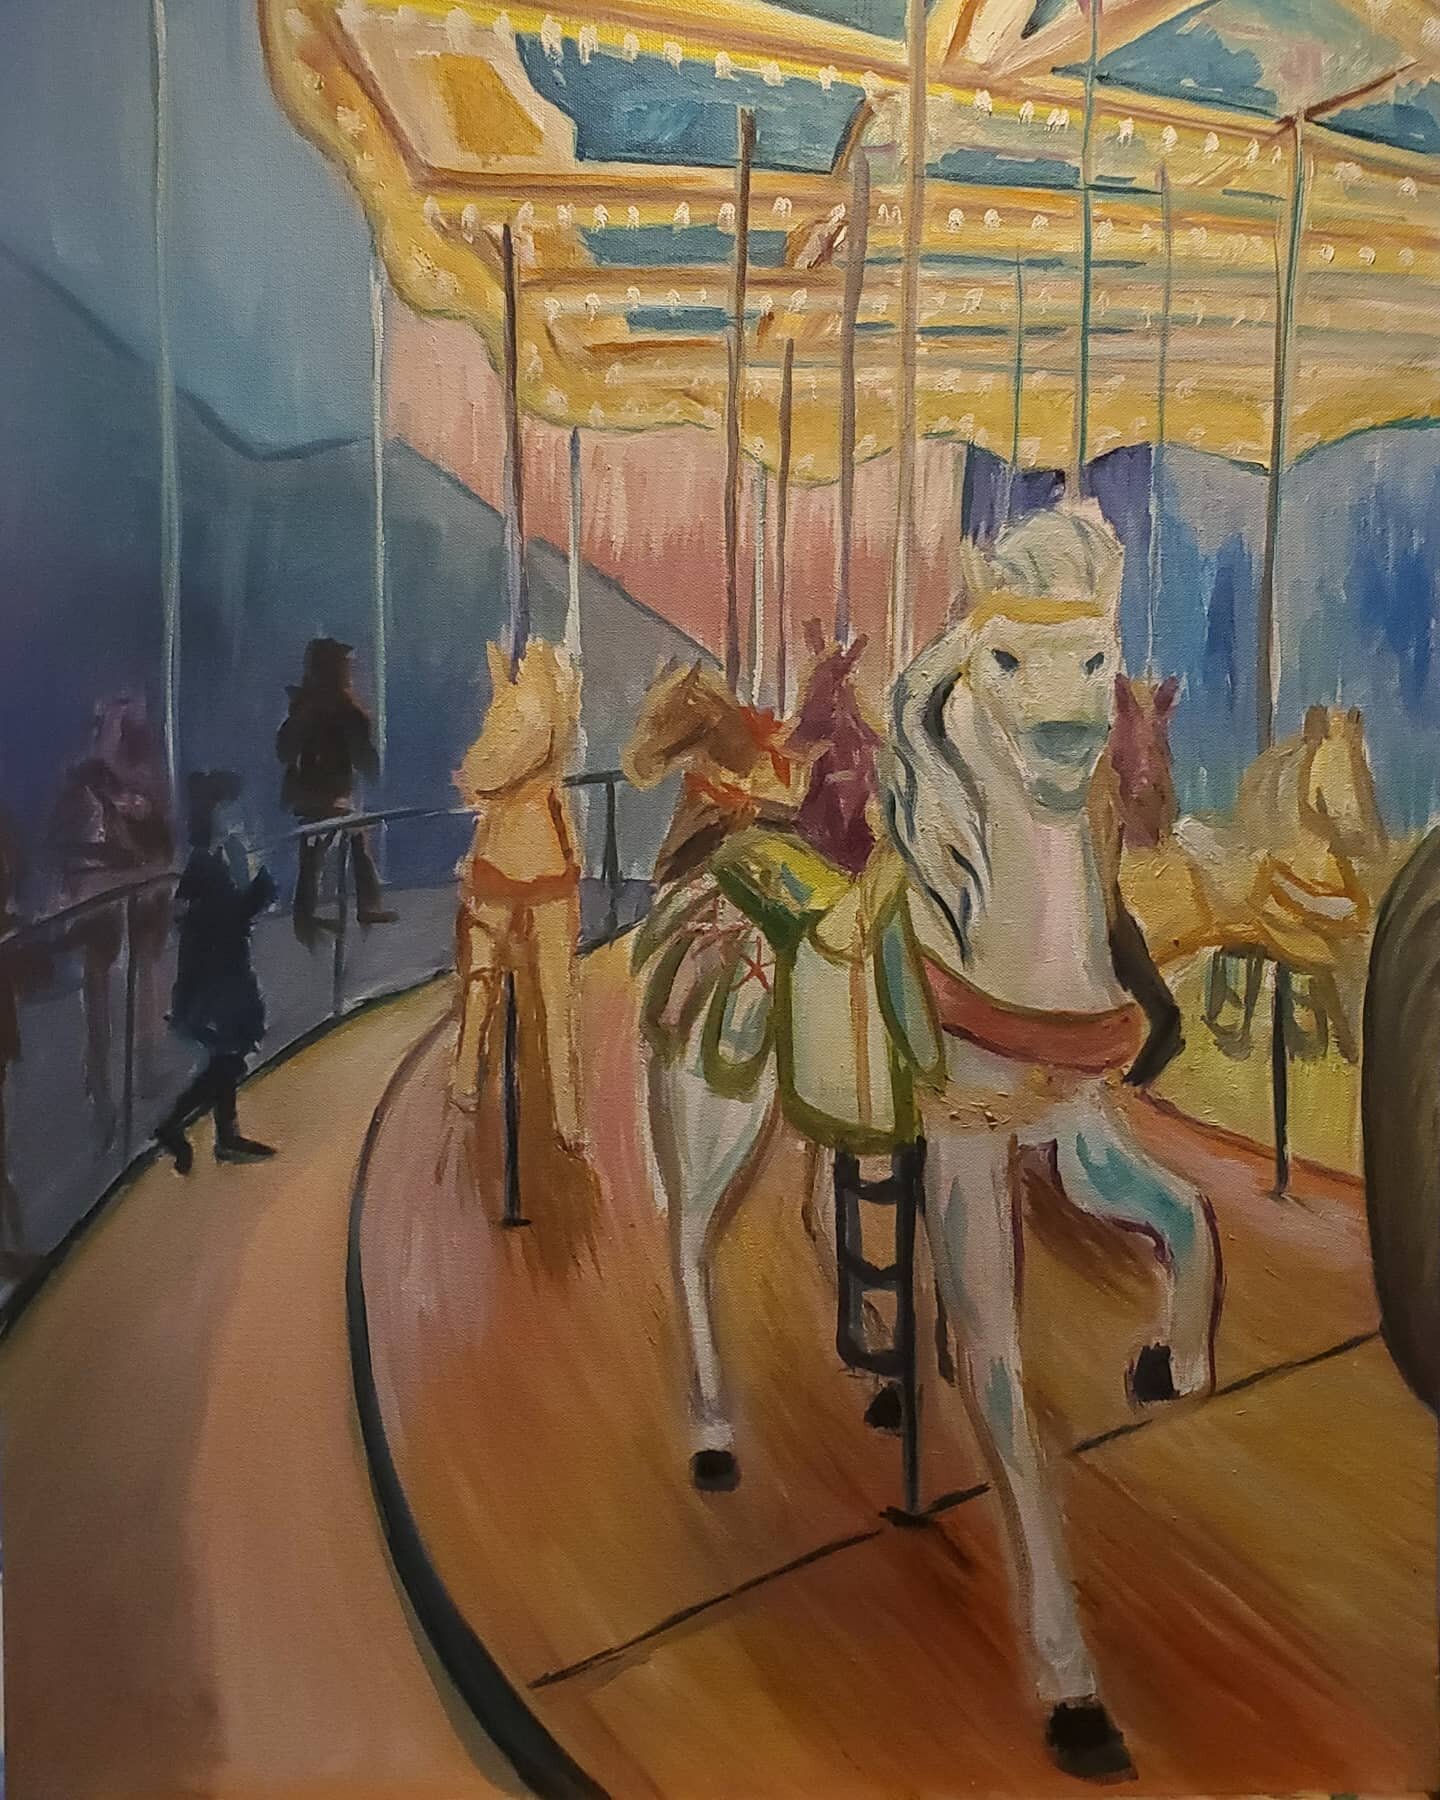 Work in progress... with the York State Fair in town it seems appropriate to be working through a carousel painting. Still a ways to complete, but I like where it's going. 

24x36
Oil on Canvas 

#only1joeyart #only1joey #painting #art #artist #yorkp